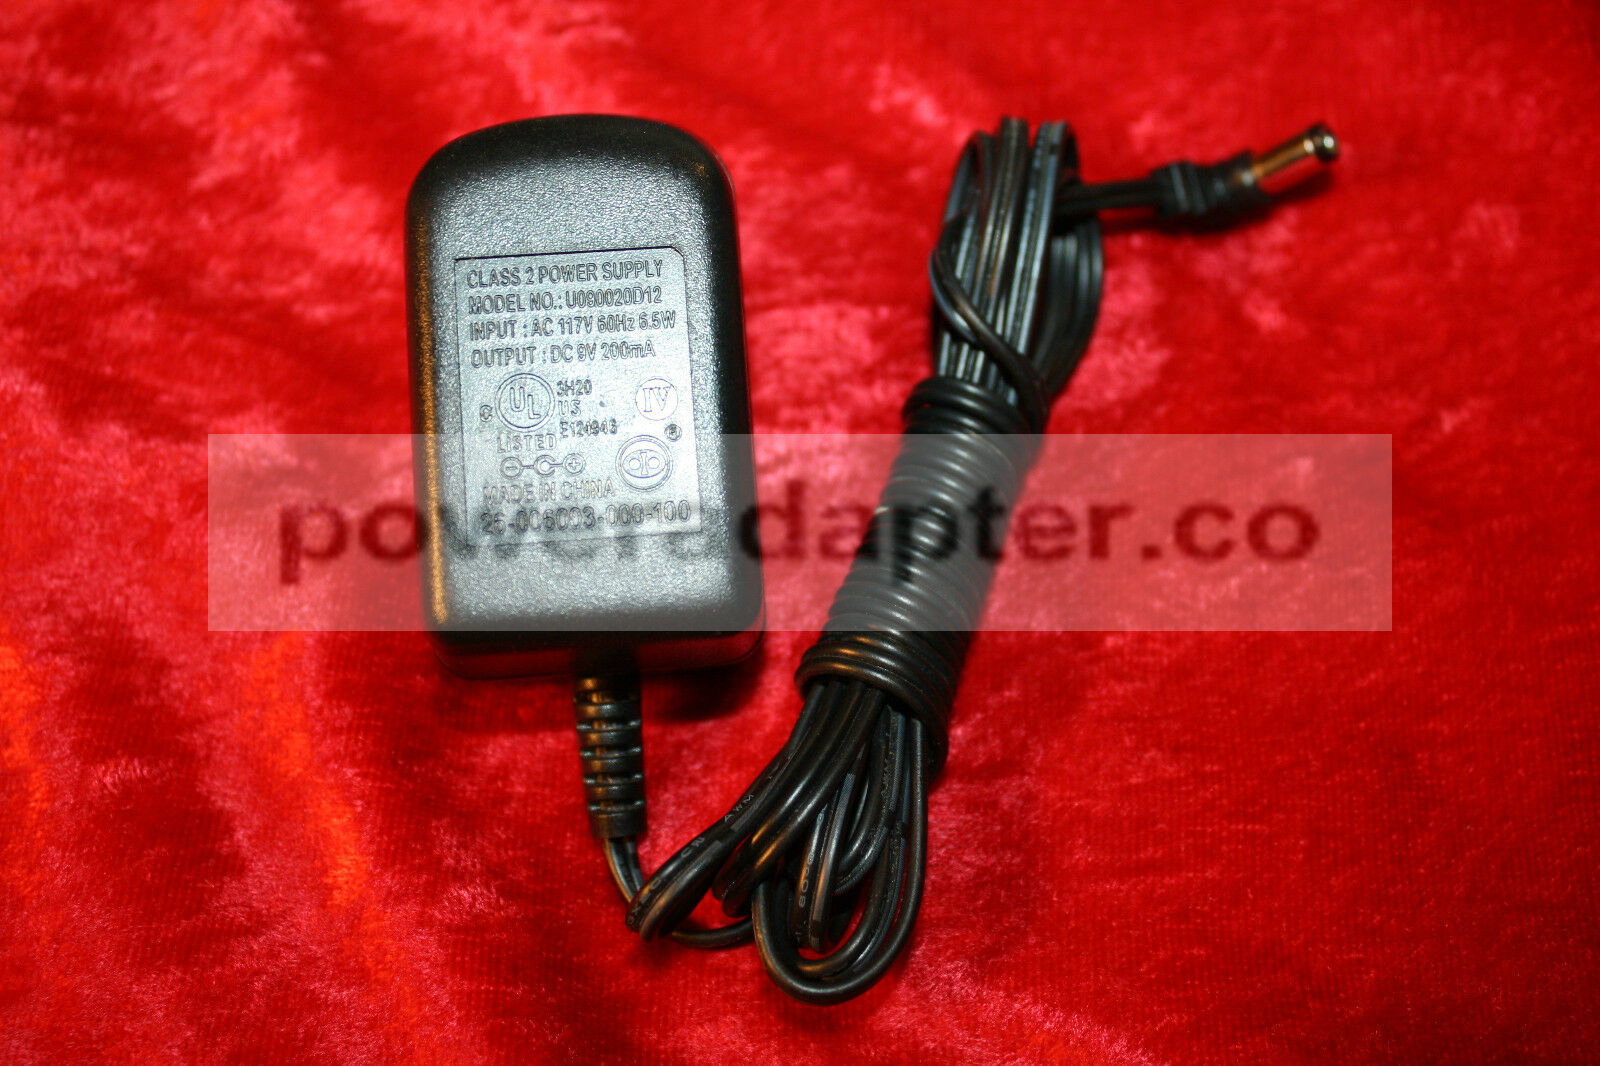 Component Telephone Vtech U090020D12 OEM Charger 9 Volt 200mA AC Adapter Condition: Used: An item that has been used